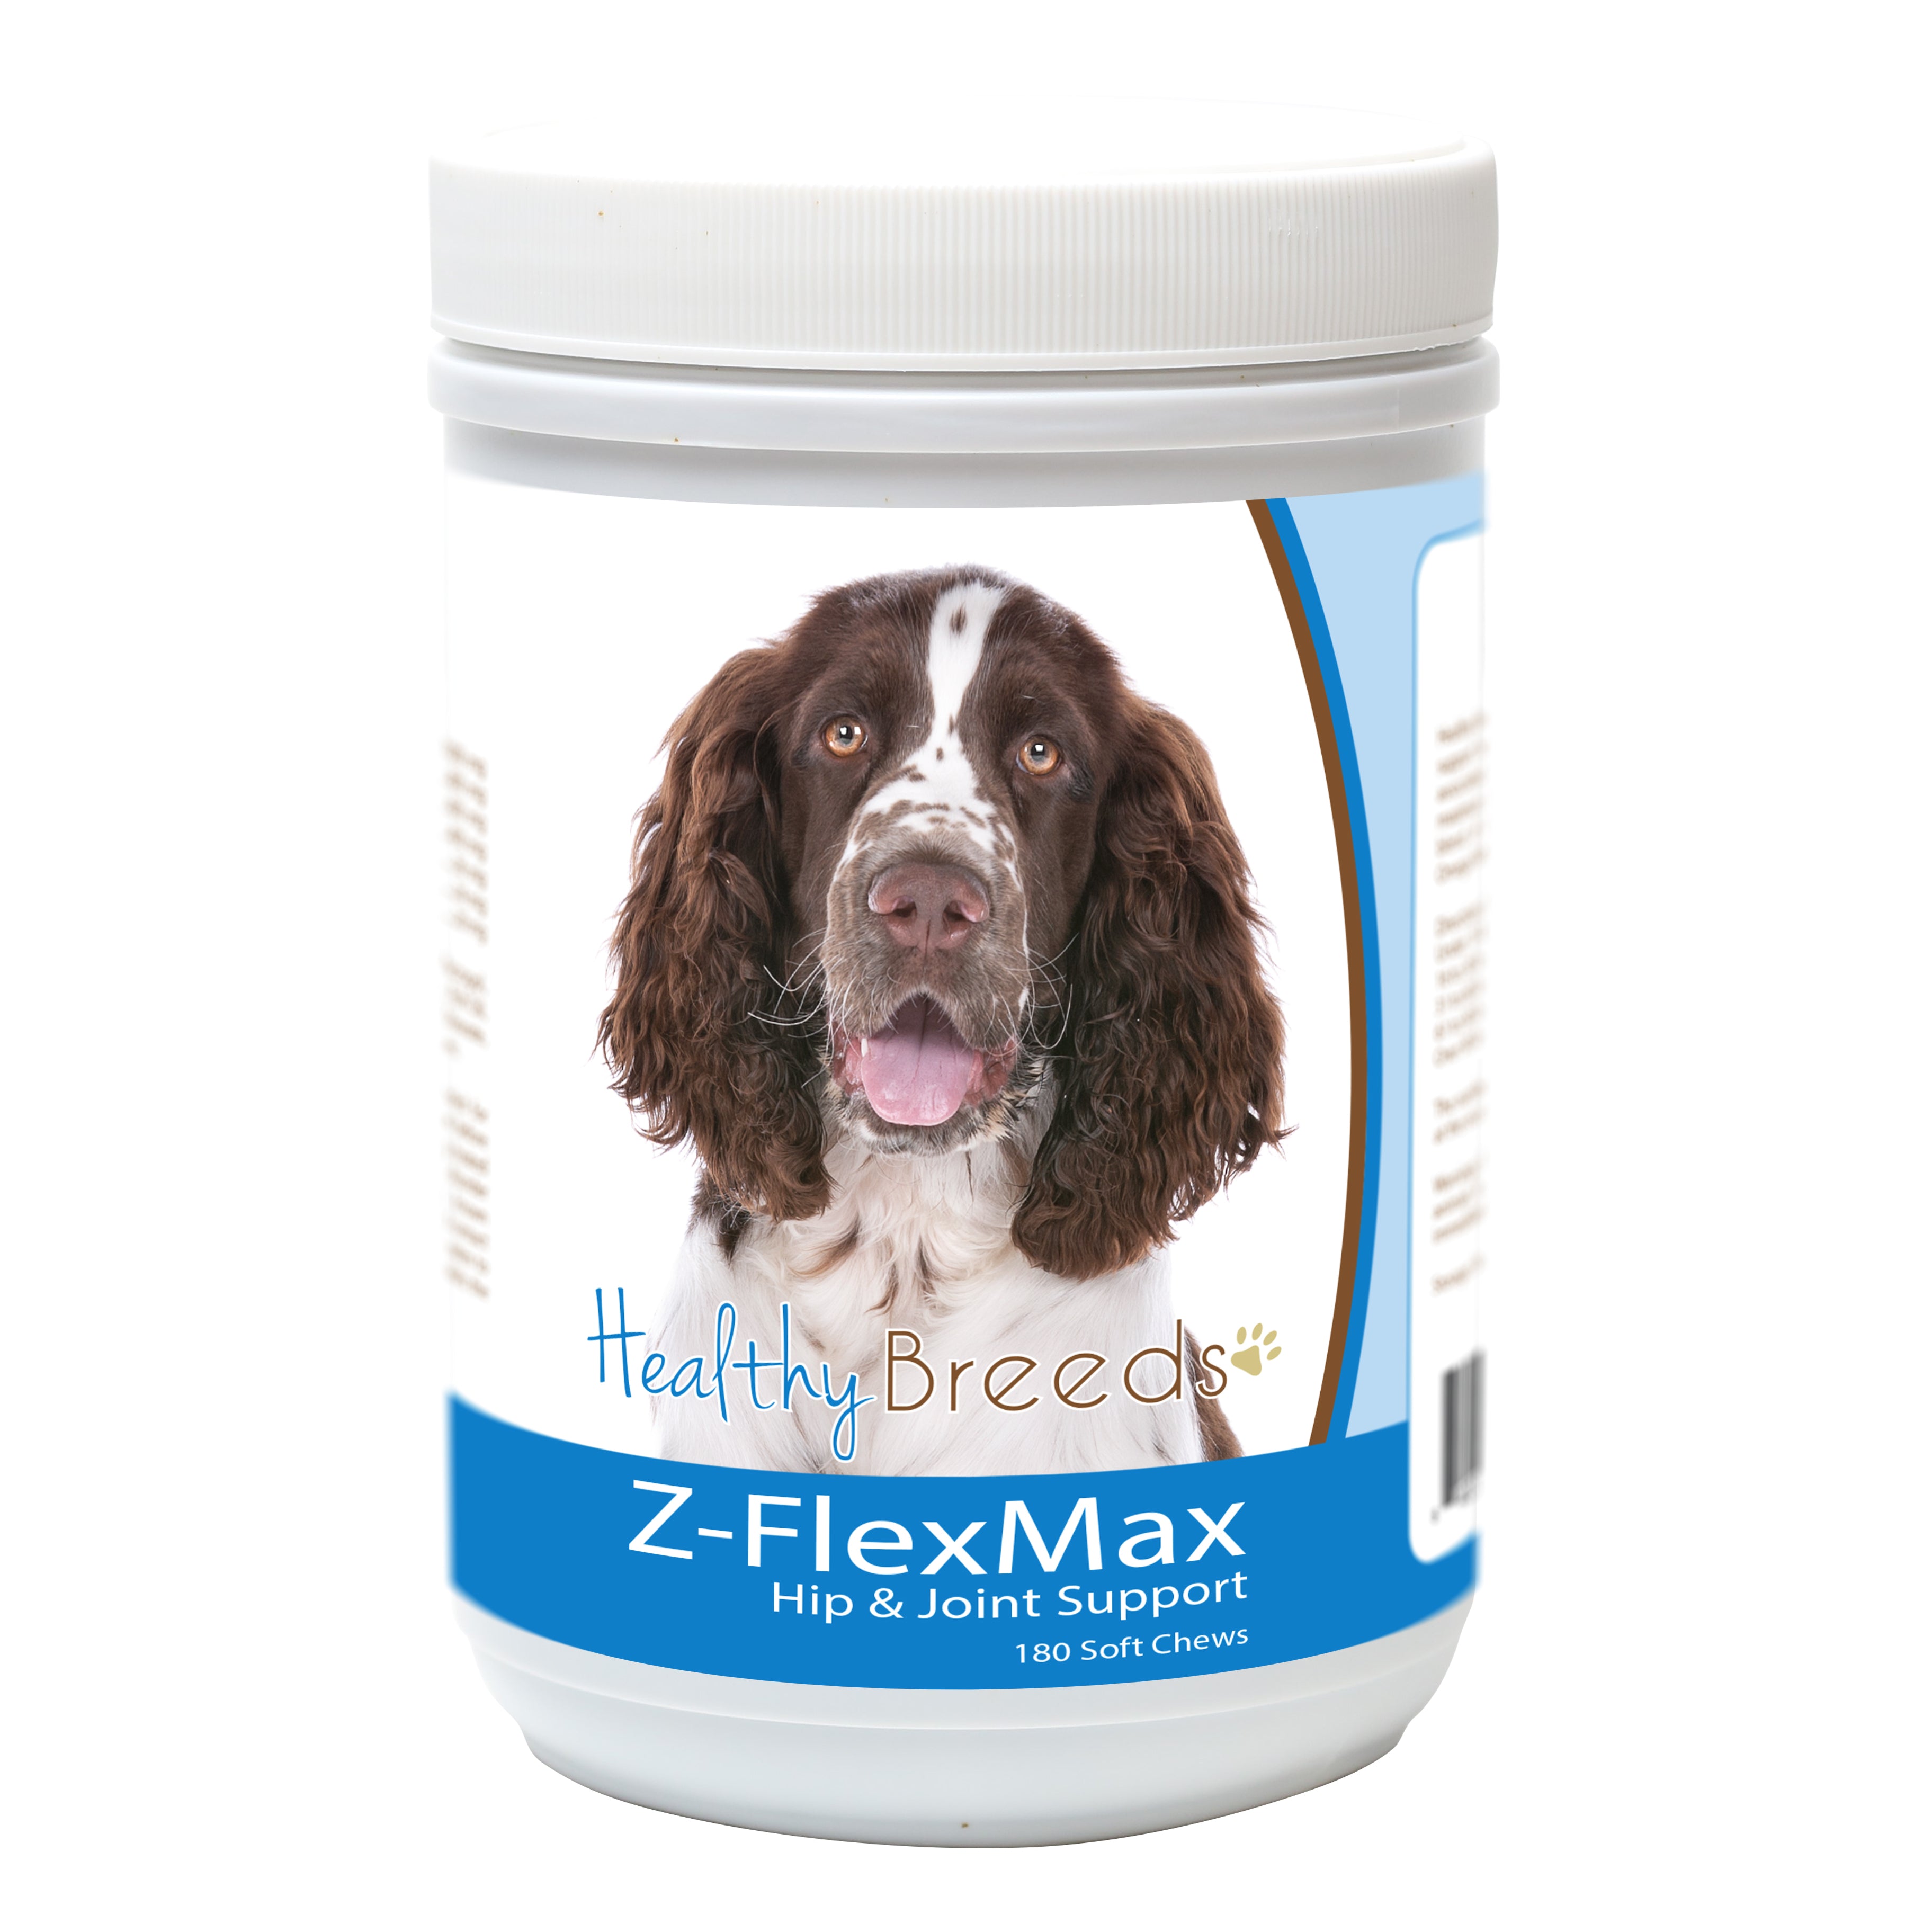 English Springer Spaniel Z-Flex Max Dog Hip and Joint Support 180 Count